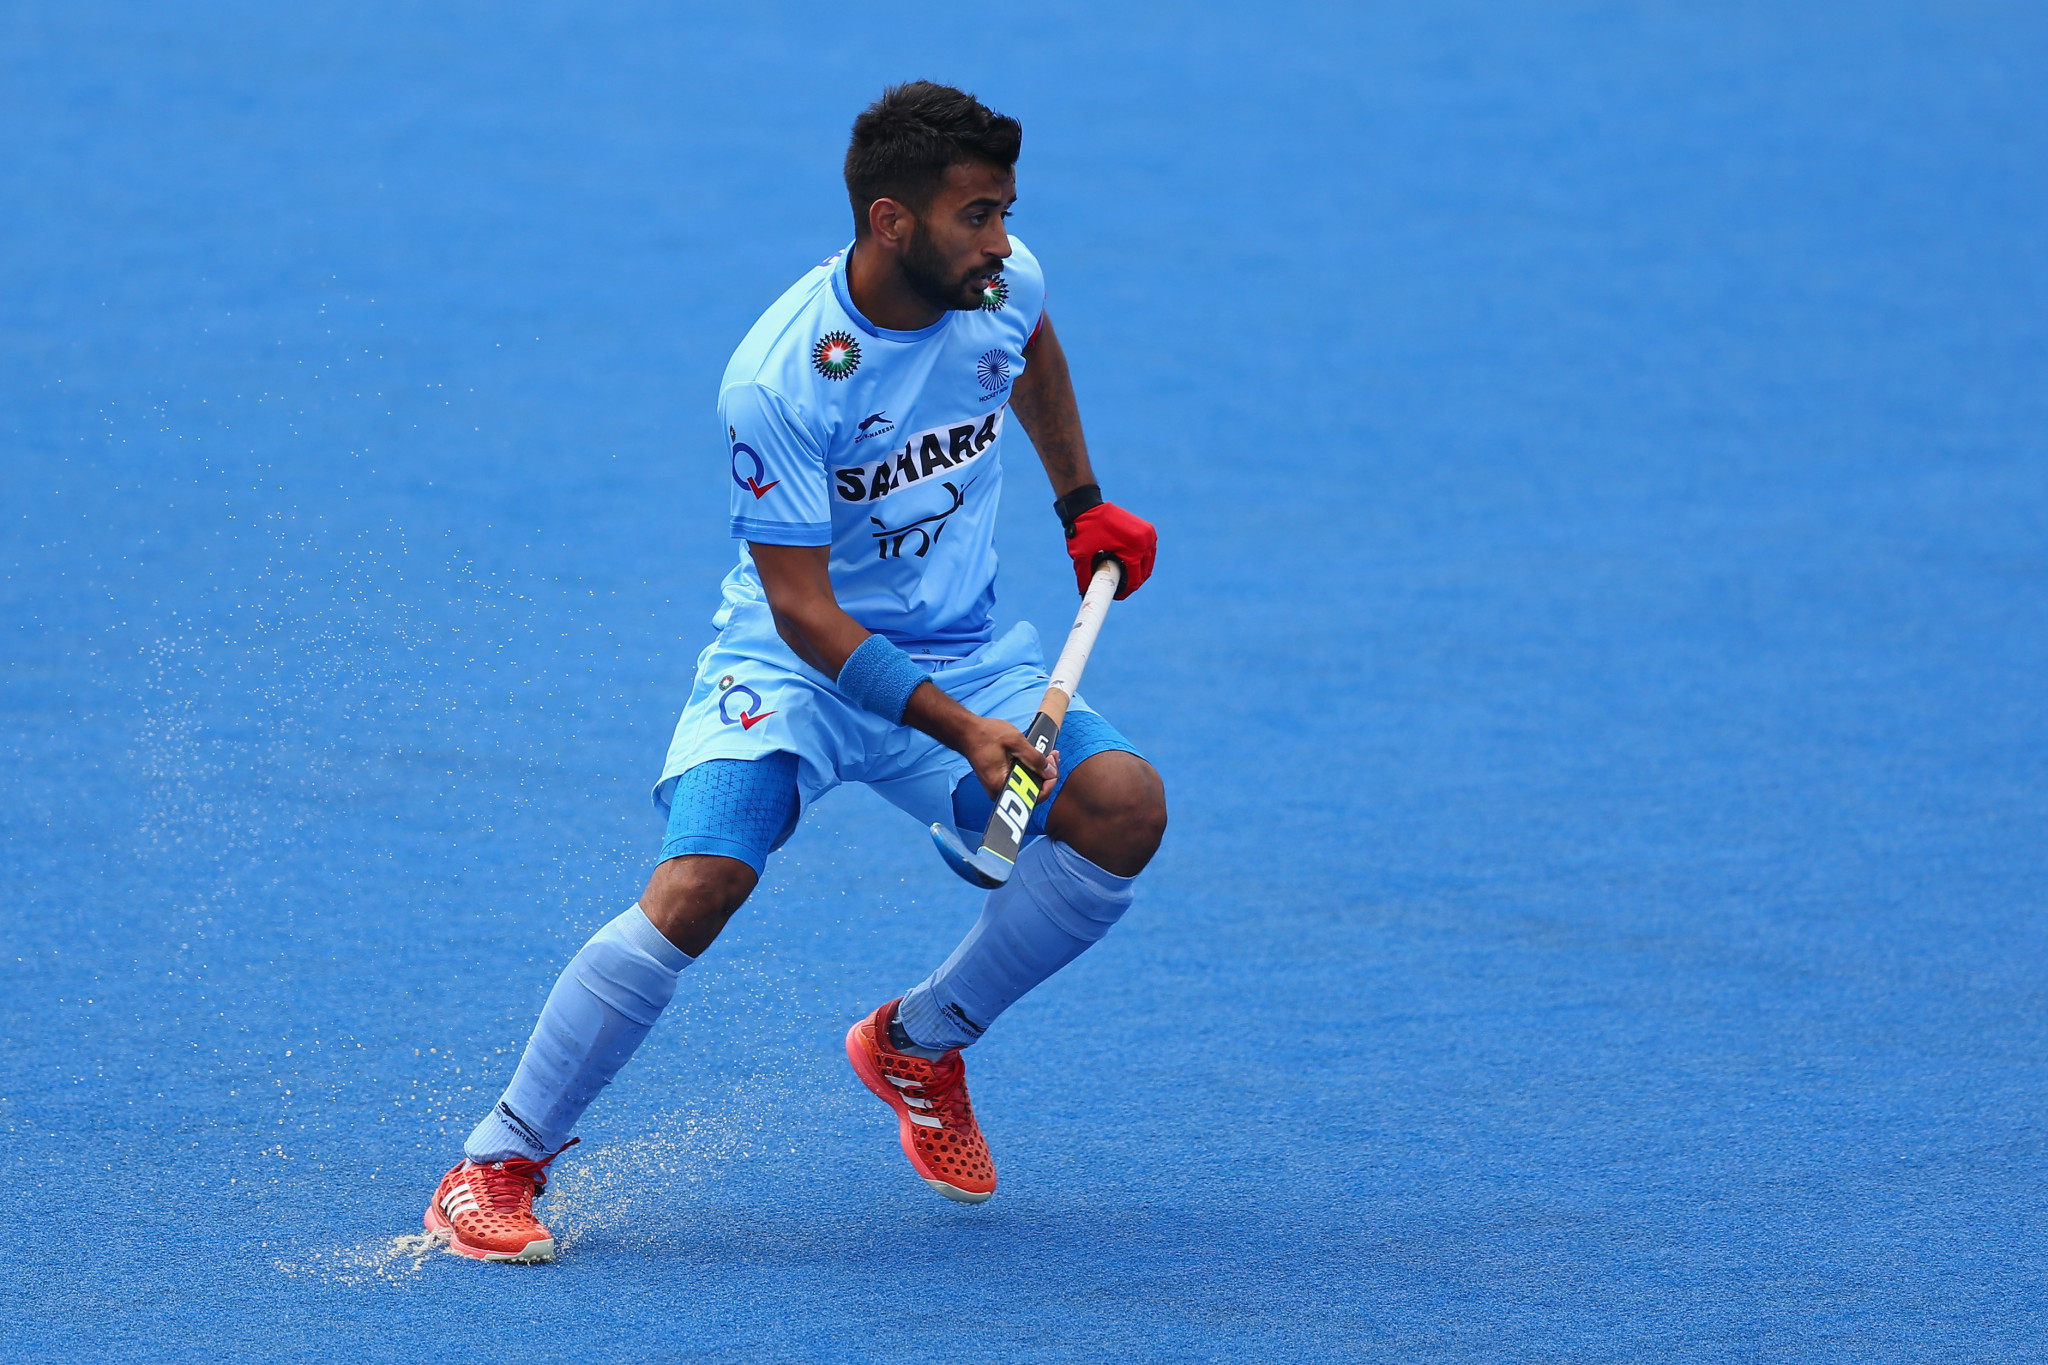 Indian captain Manpreet Singh has targeted the gold medal at Gold Coast 2018 ©Getty Images